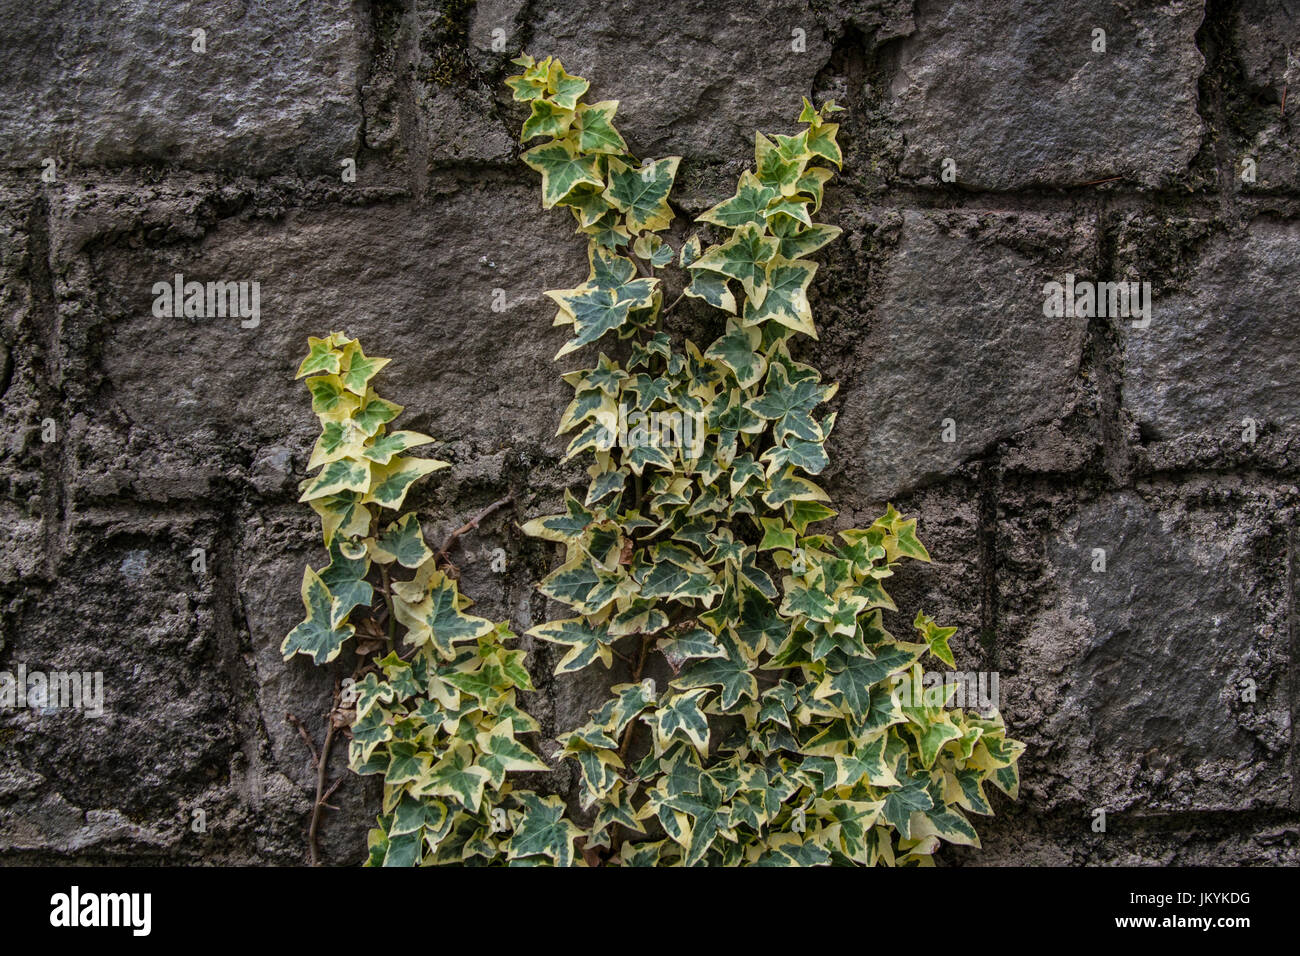 Hedera helix on a Rock Wall Stock Photo